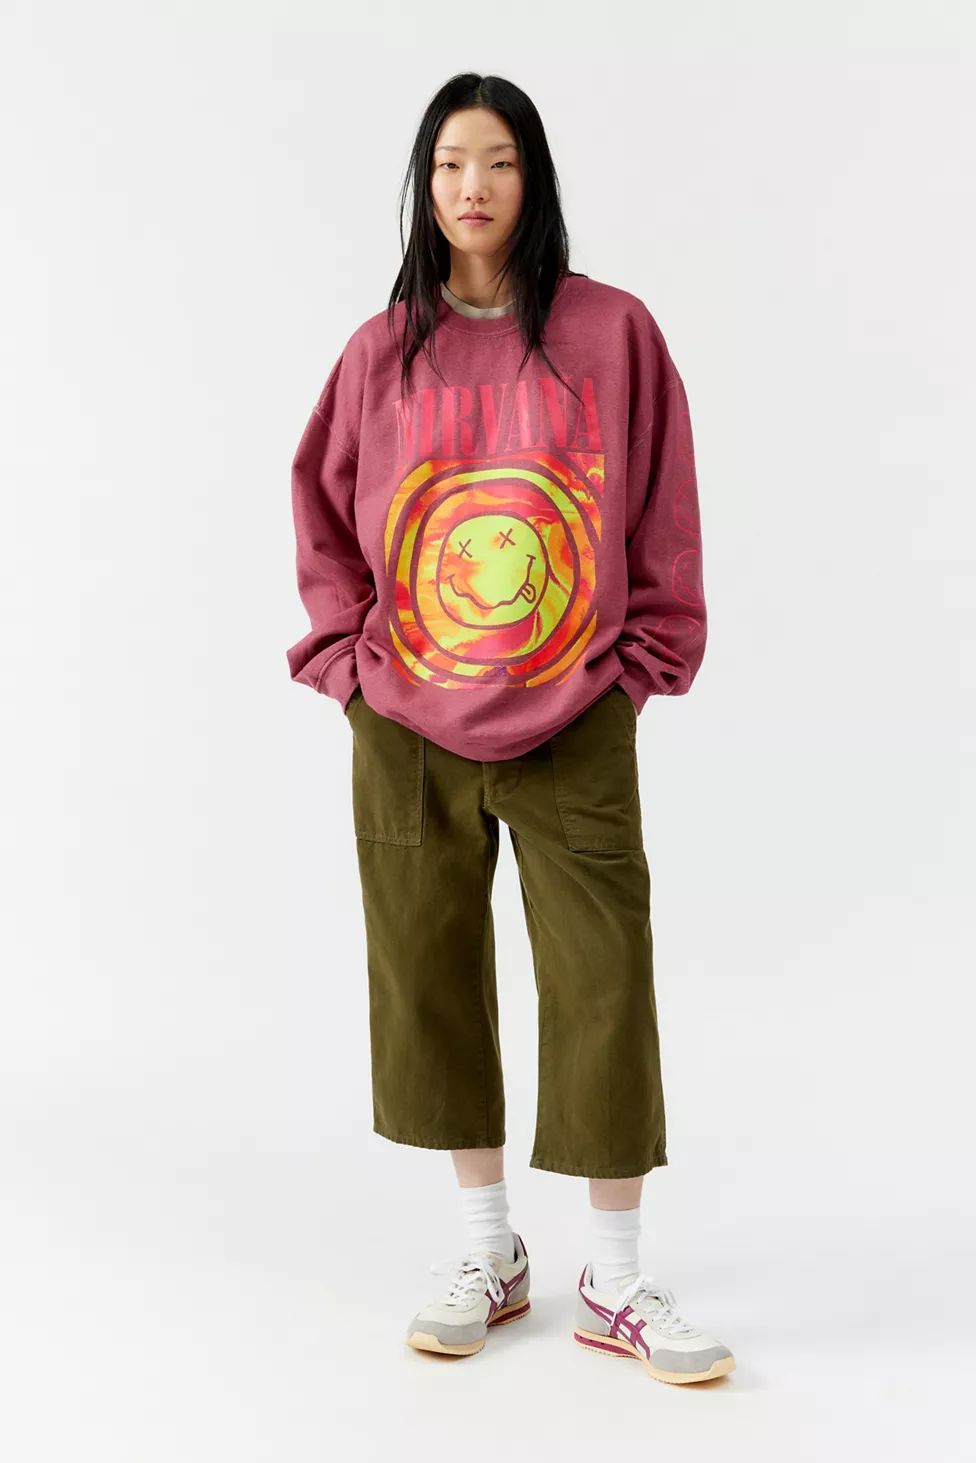 Nirvana Smile Overdyed Crew Neck Sweatshirt | Urban Outfitters (US and RoW)